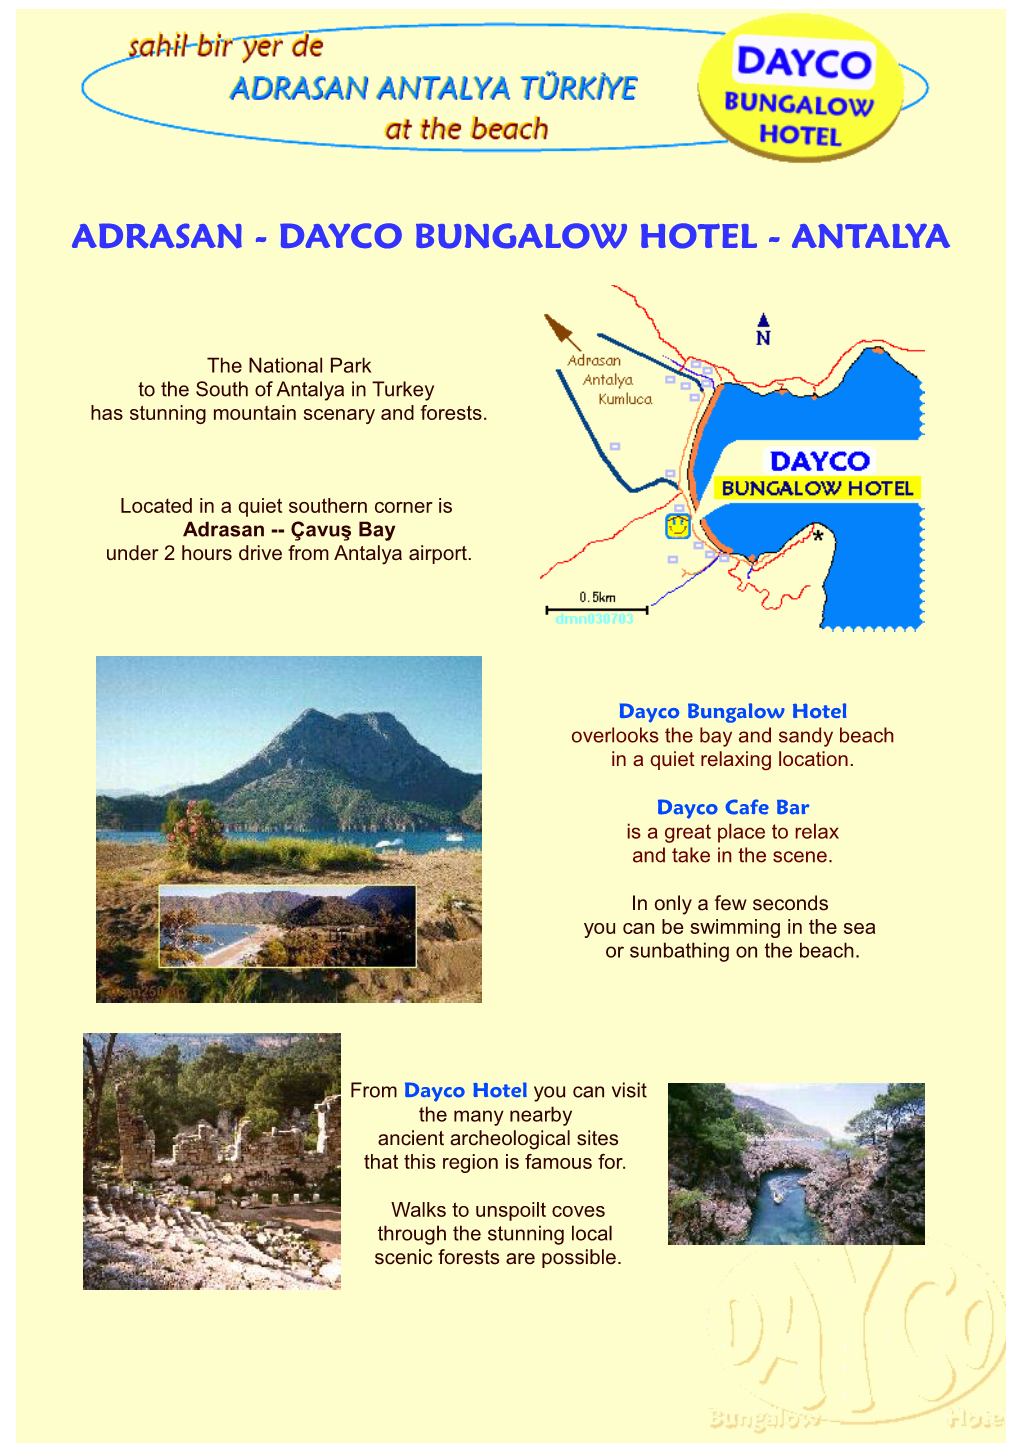 Adrasan Bungalow Hotel "DAYCO" Quiet Relaxing Holiday in Turkey